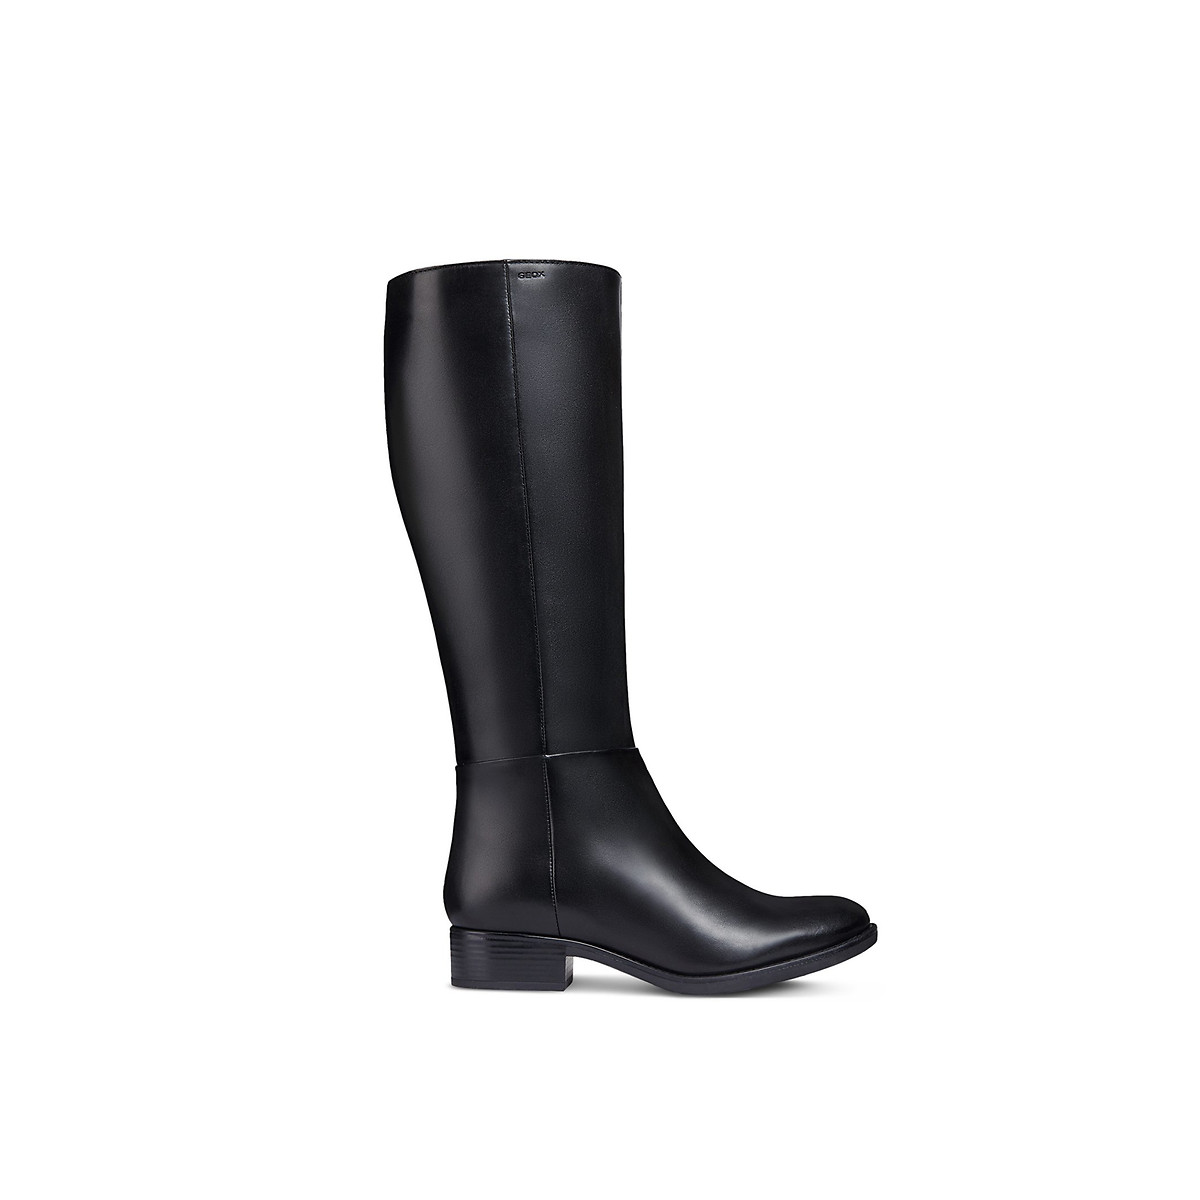 D felicity leather knee-high boots with heel, black, Geox | La Redoute